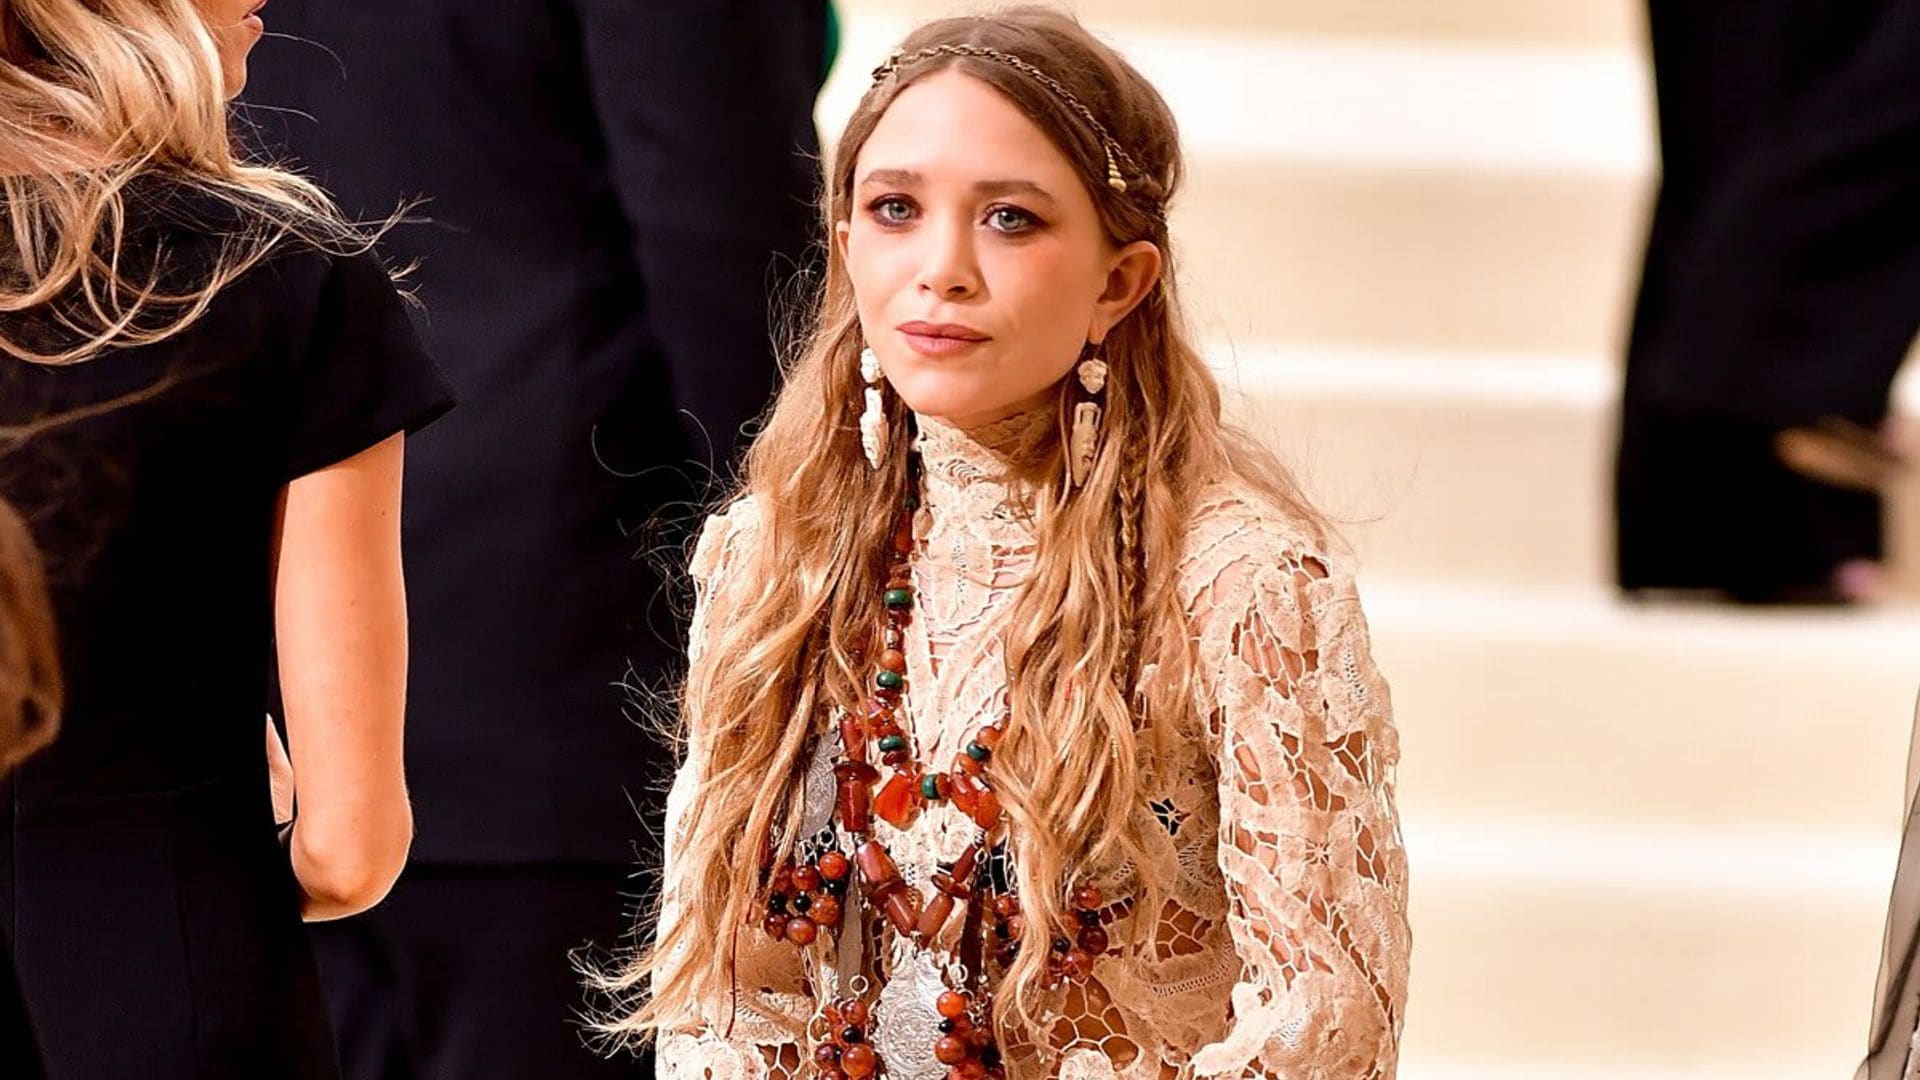 Mary-Kate Olsen was seen getting cozy with the CEO of Brightwire over dinner